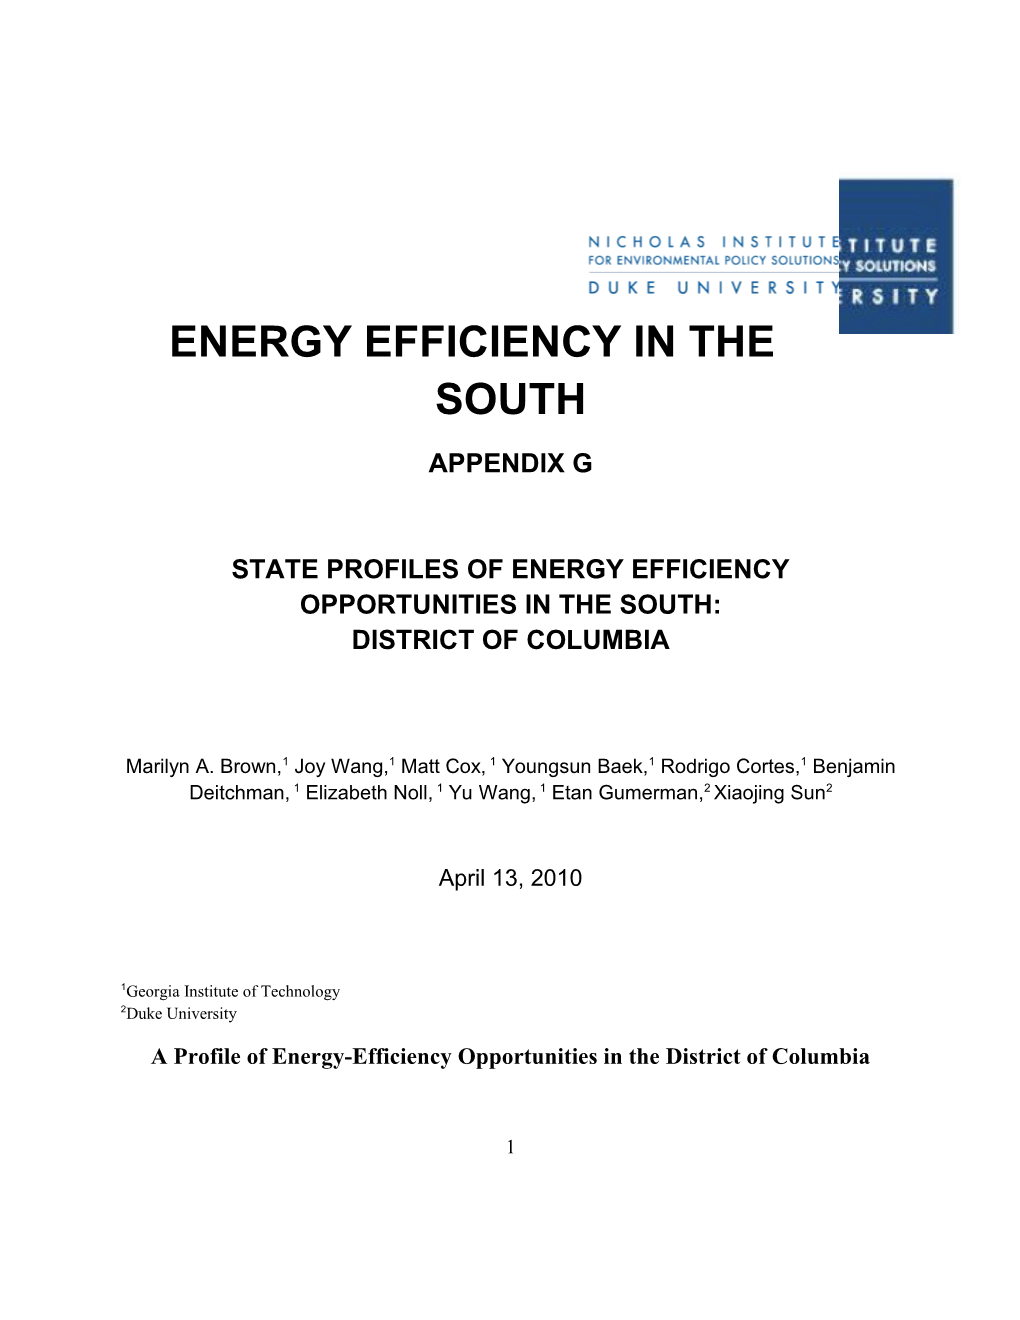 Energy Efficiency in the South